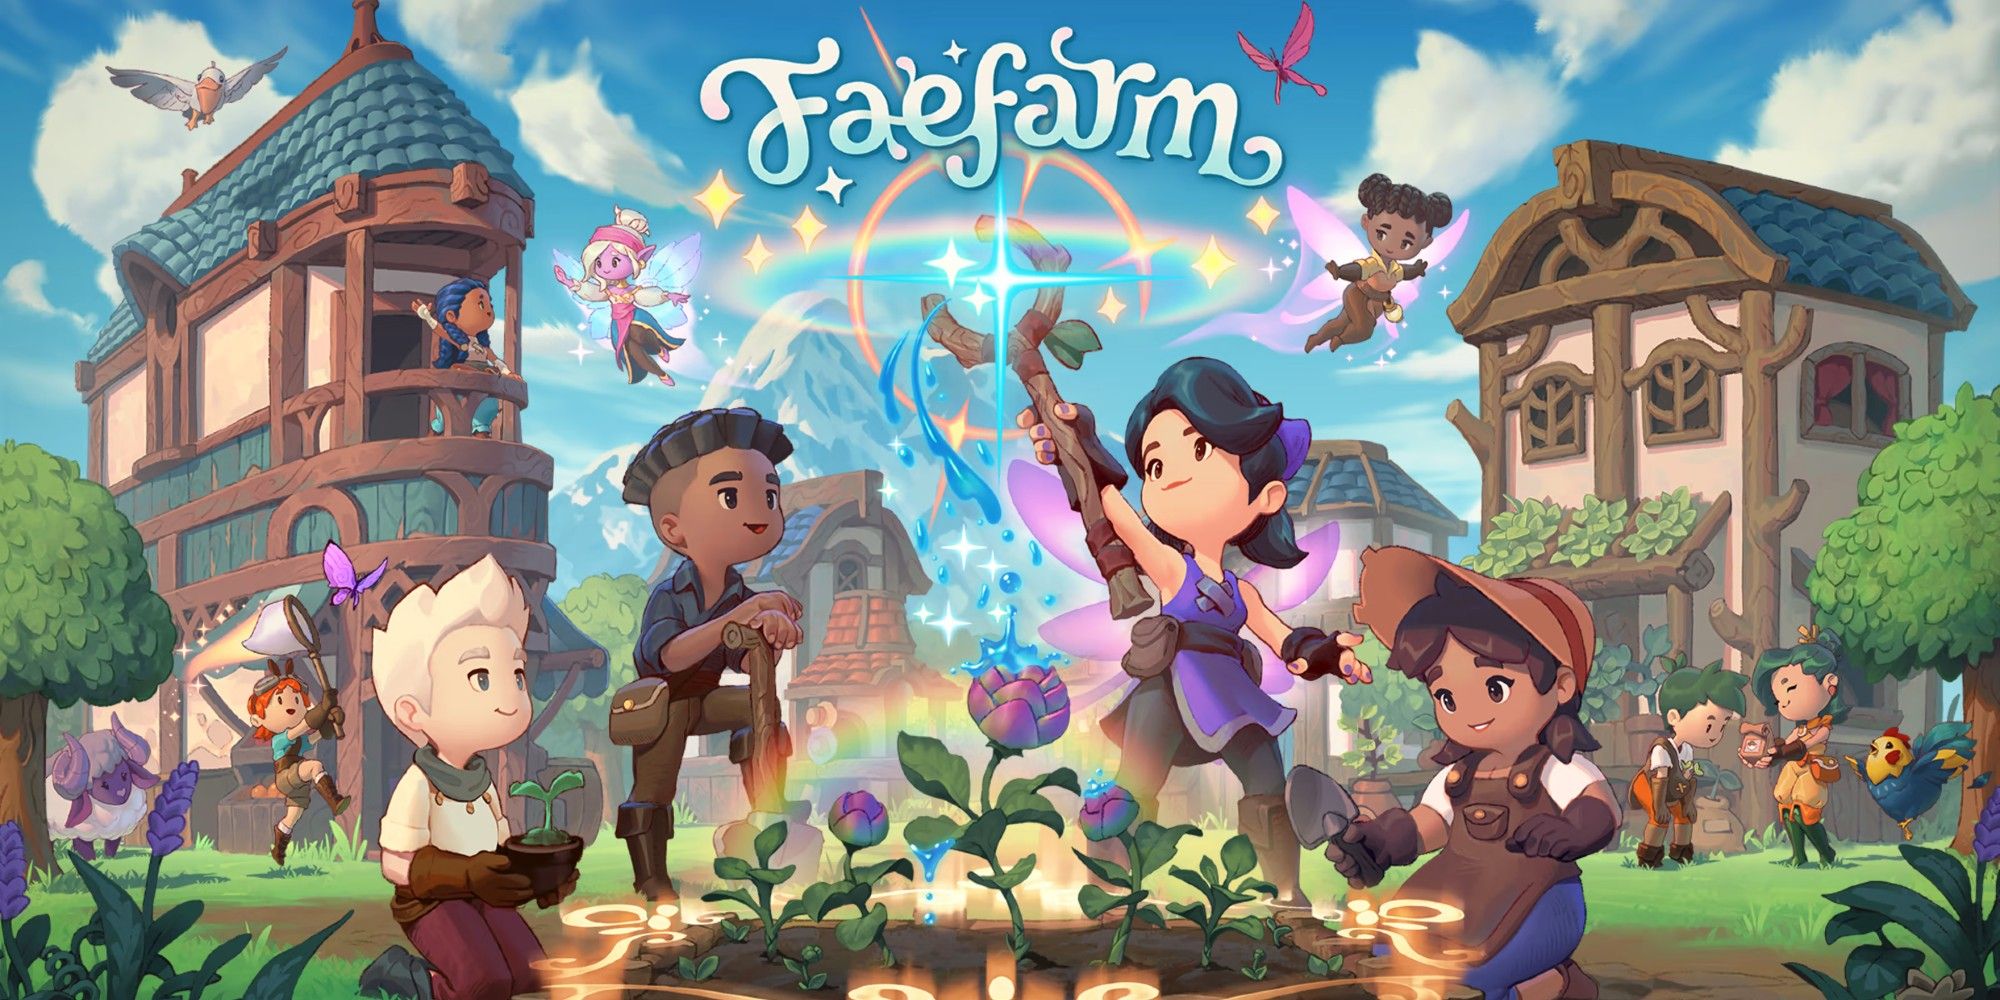 Fae Farm Key Art showing four character surrounding crops, with one holding up a wand.